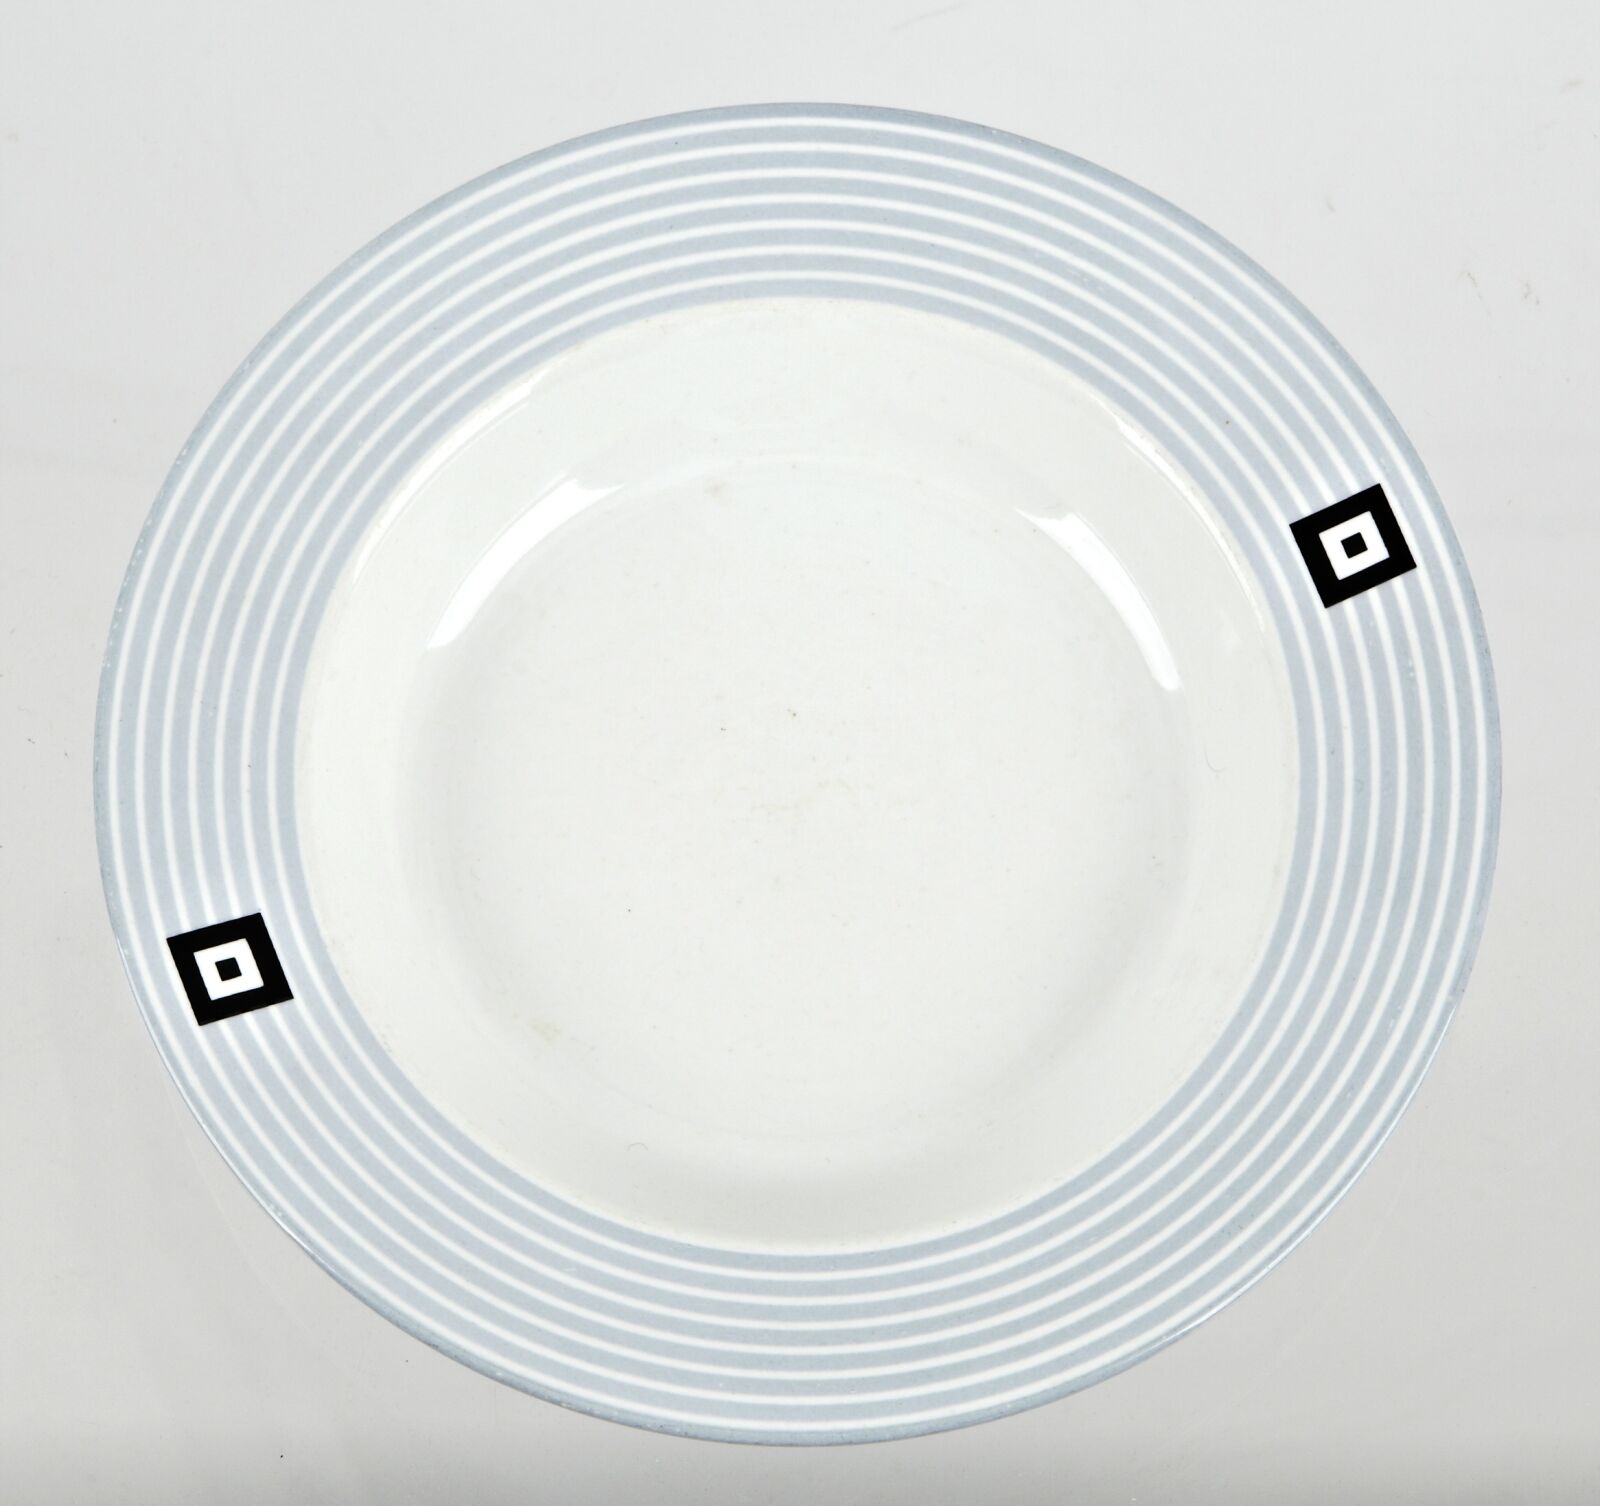 Canon EOS 5D Mark II sample photo. Plate, dining table, tableware photography